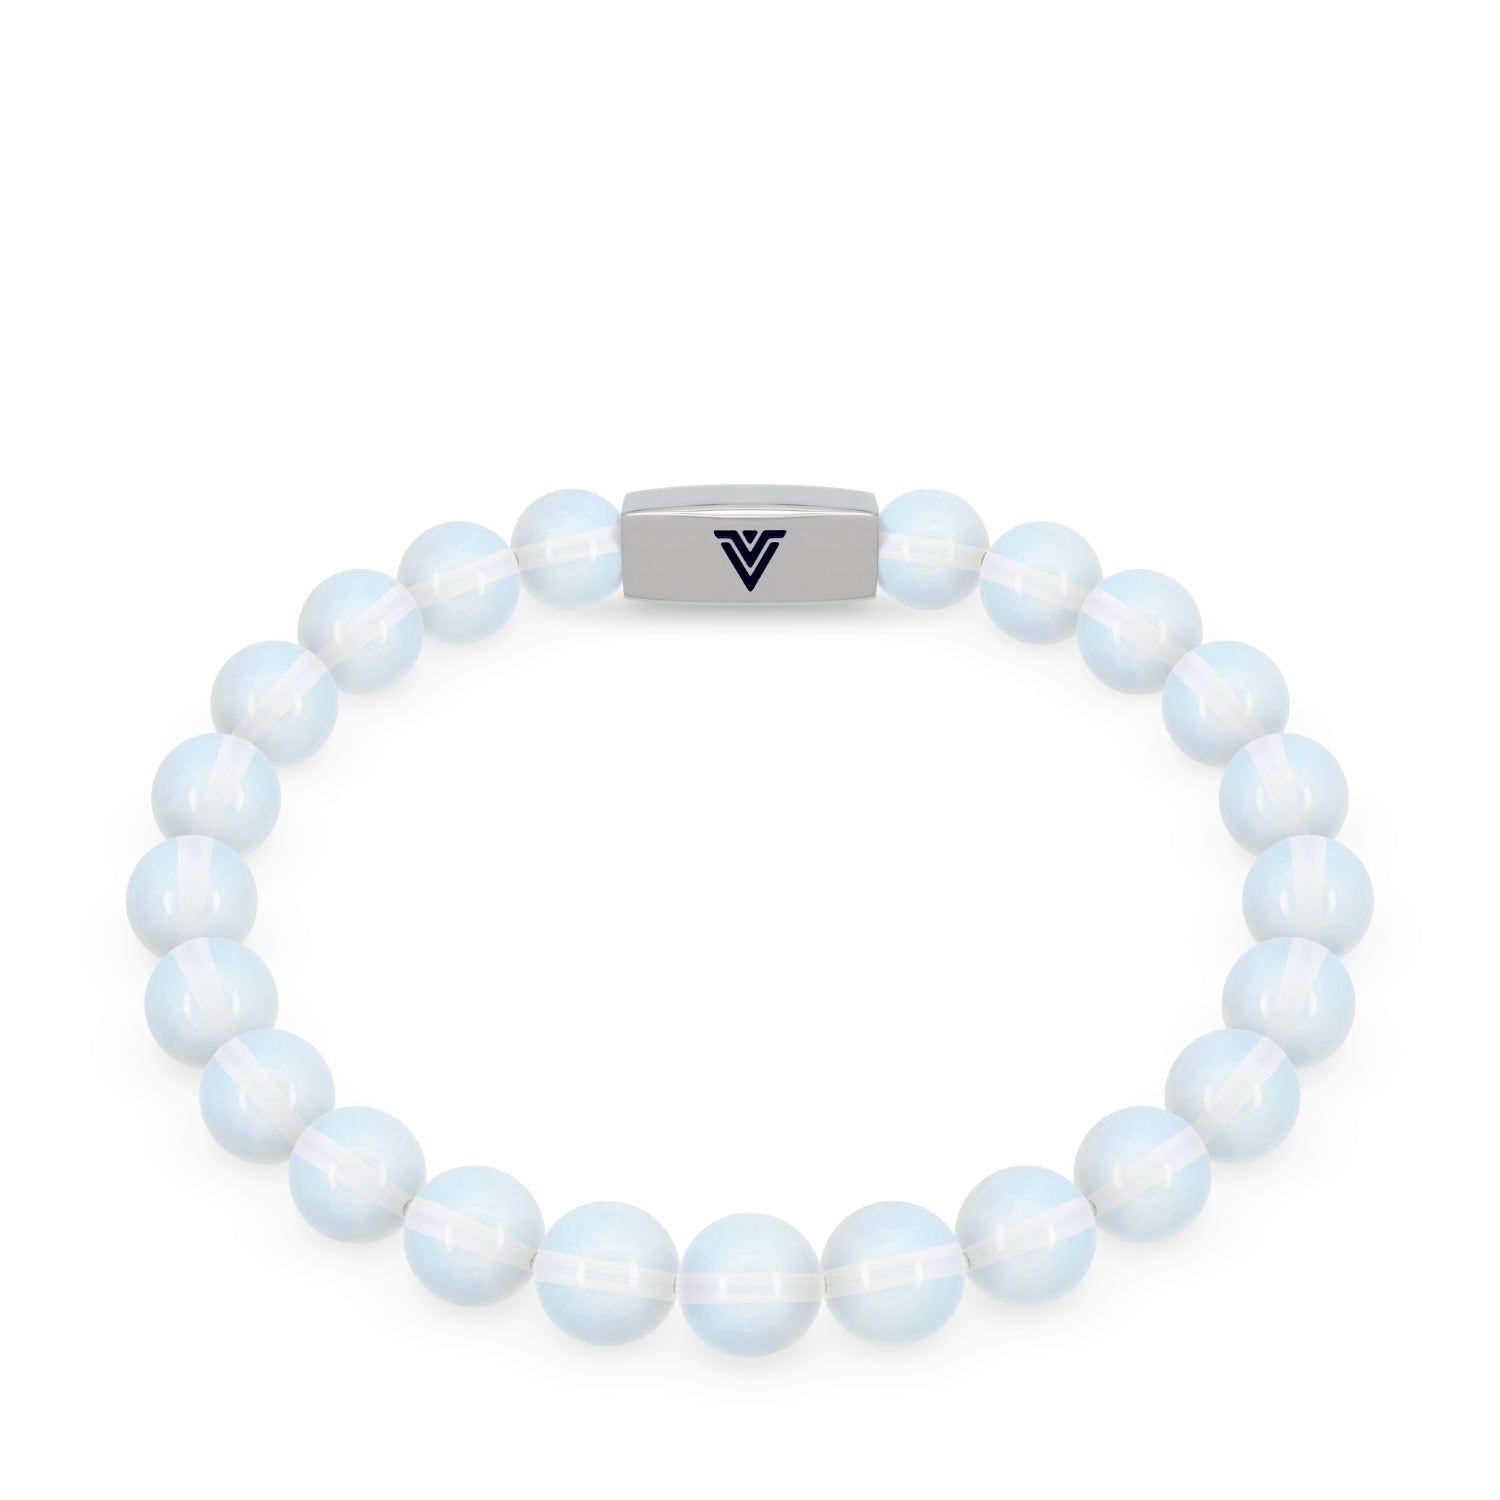 Front view of an 8mm Opalite beaded stretch bracelet with silver stainless steel logo bead made by Voltlin